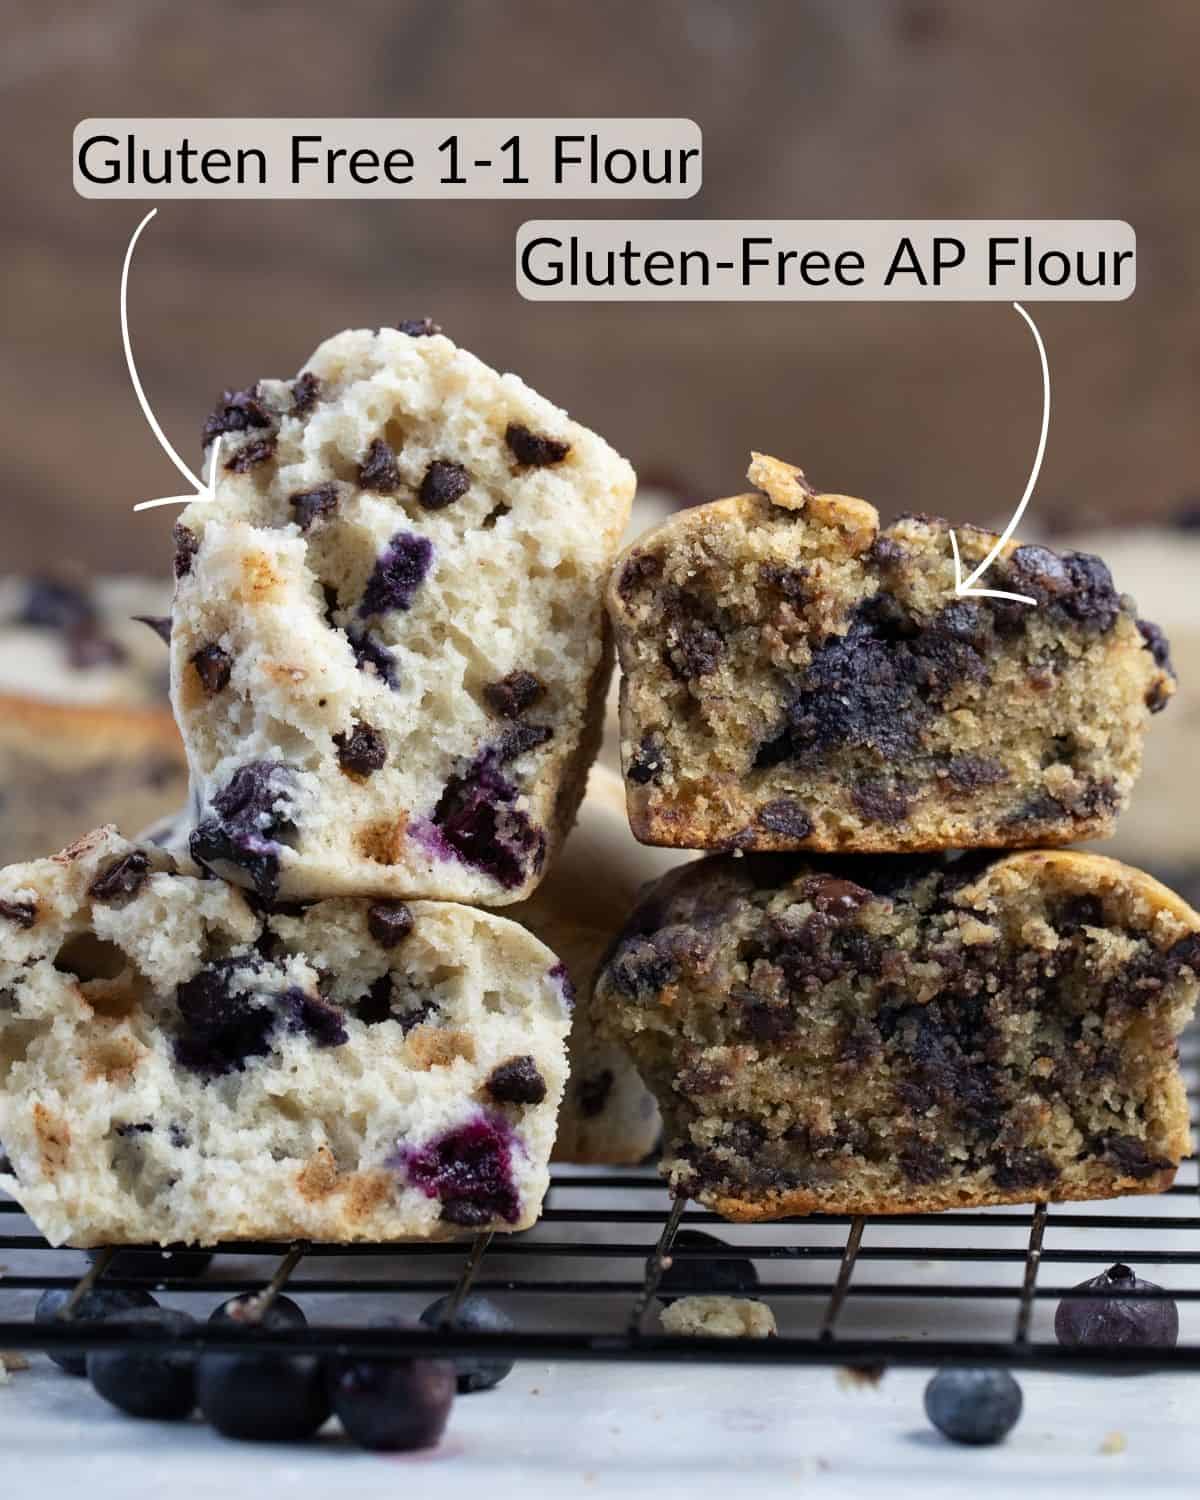 Two stacks ofgluten free blueberry chocolate chip muffins to show the difference in texture, size, and color when using different gluten free flours.